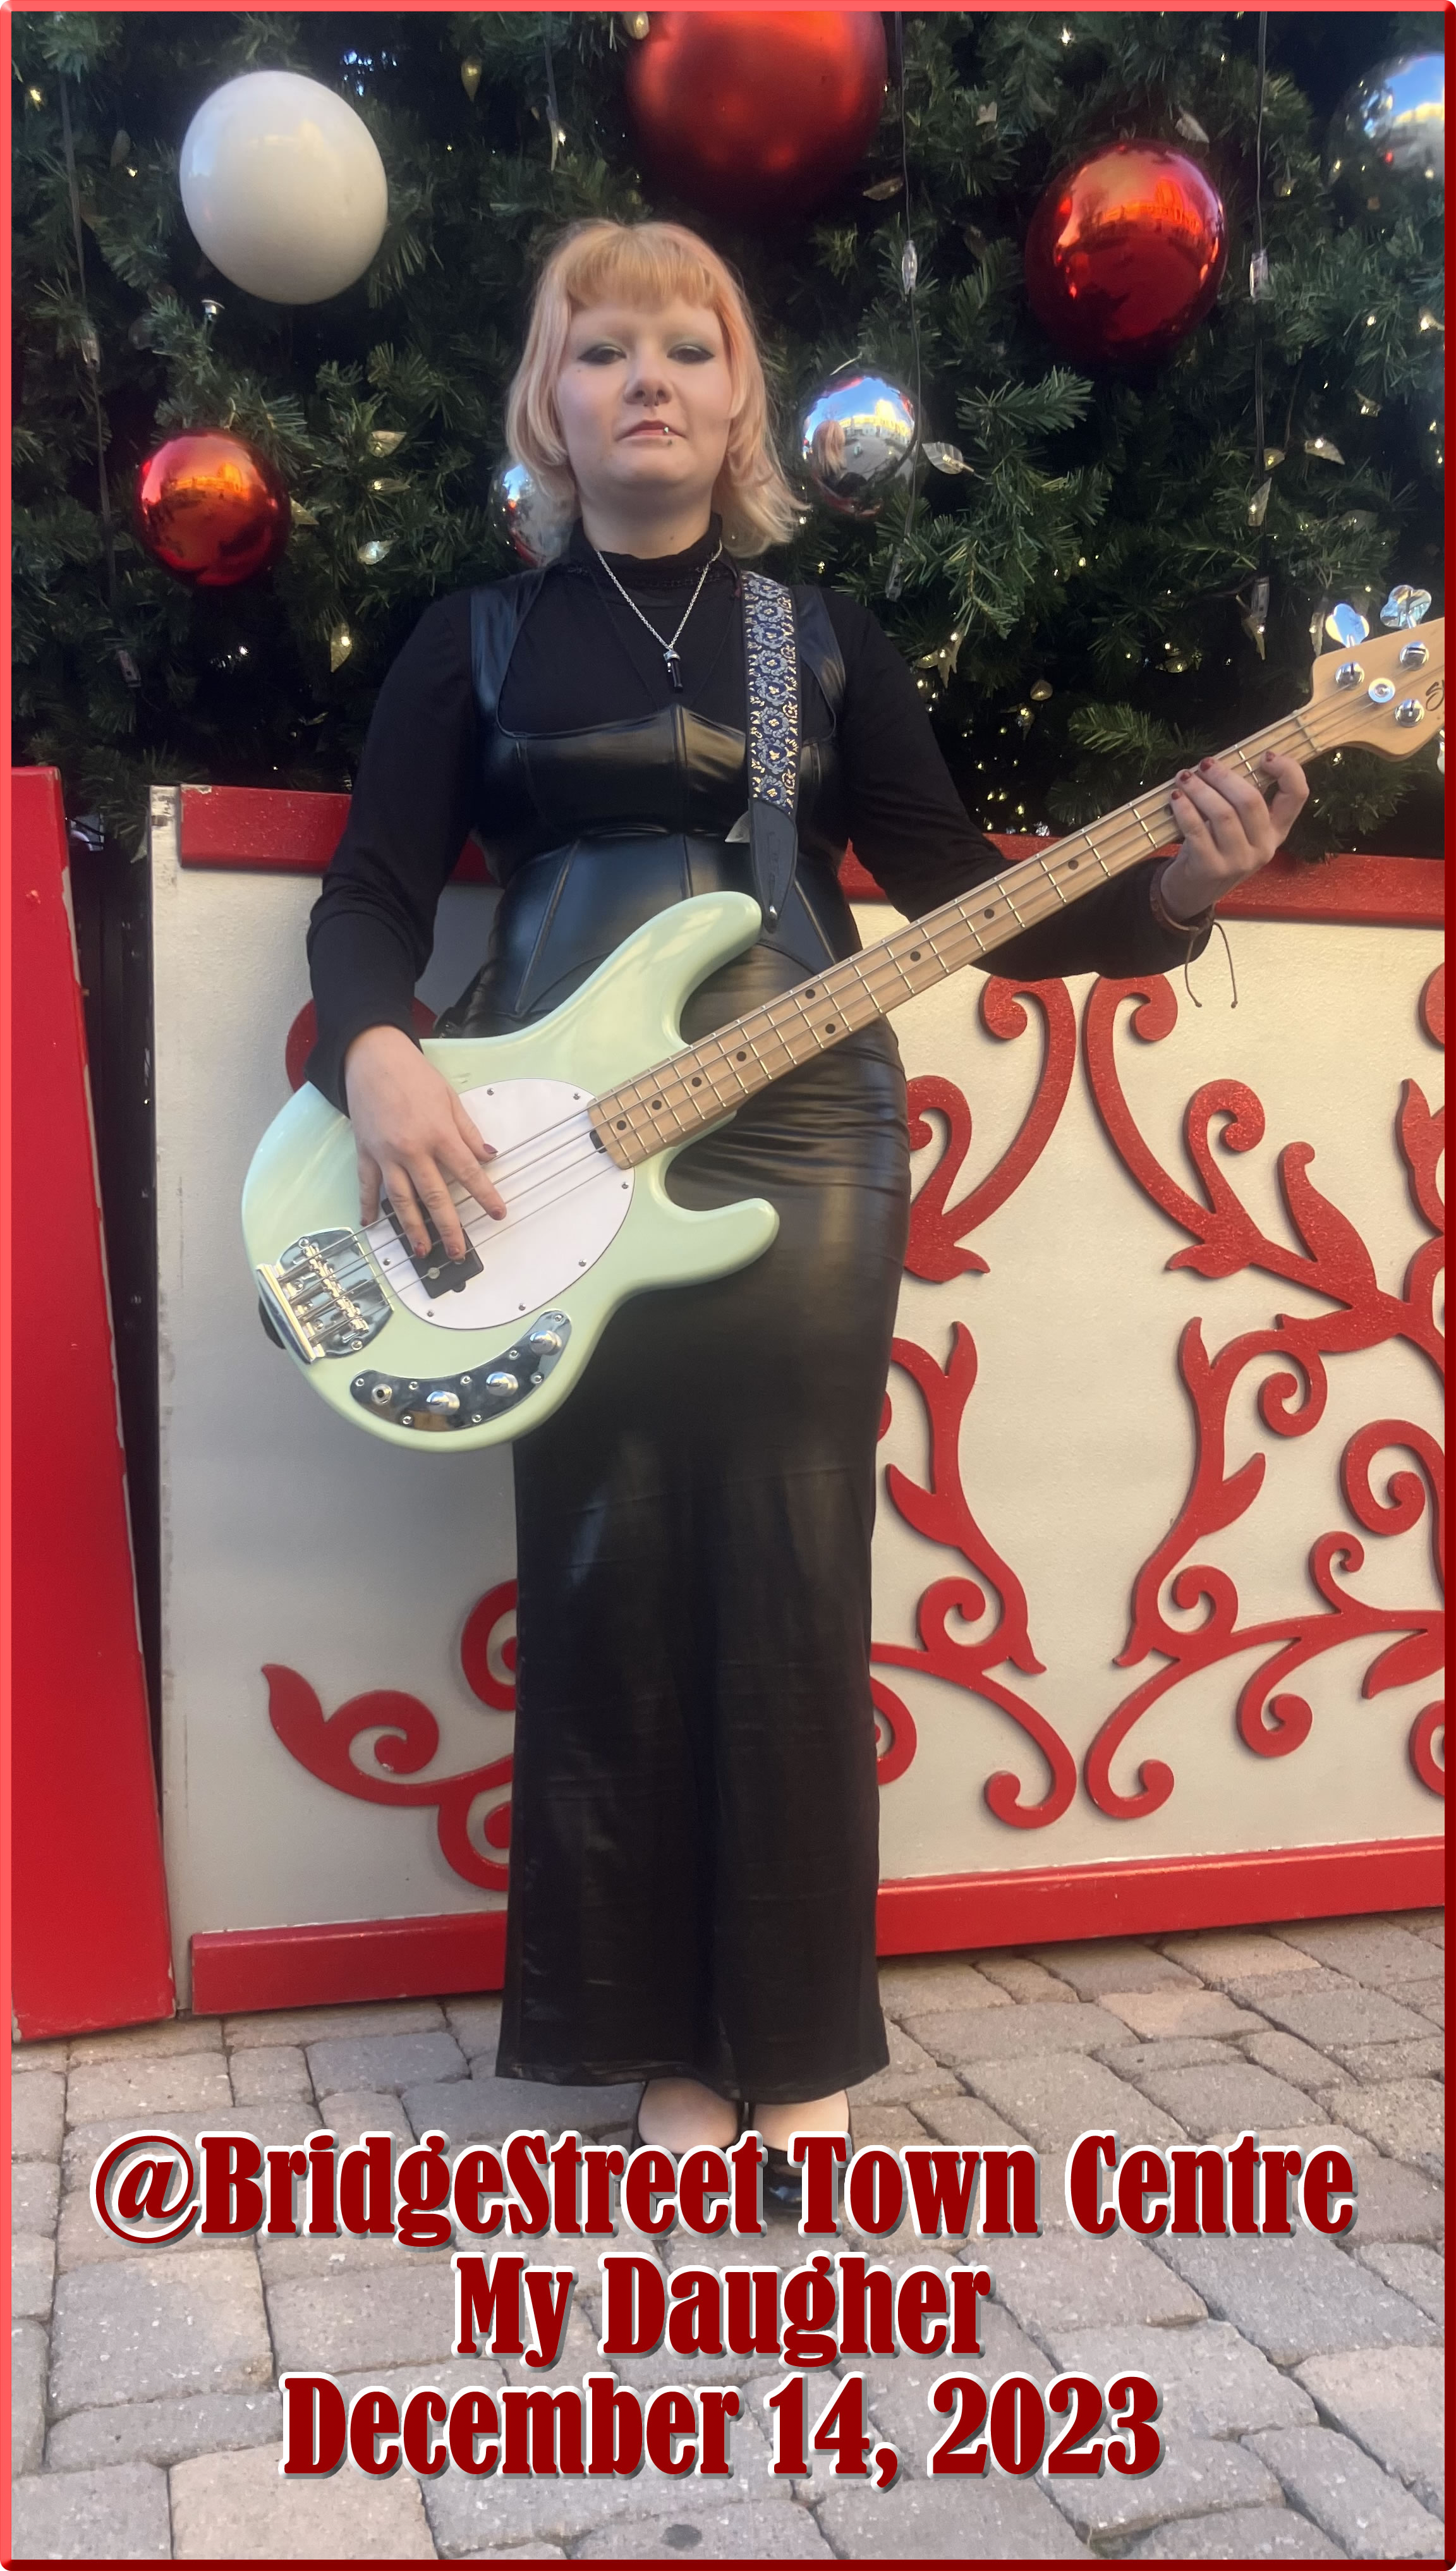 Rogers Jazz Band Guitarist, Smith O'Connor #smithoconnor DOCs daughter poses by large Christmas Tree at Bridge Street Town Center